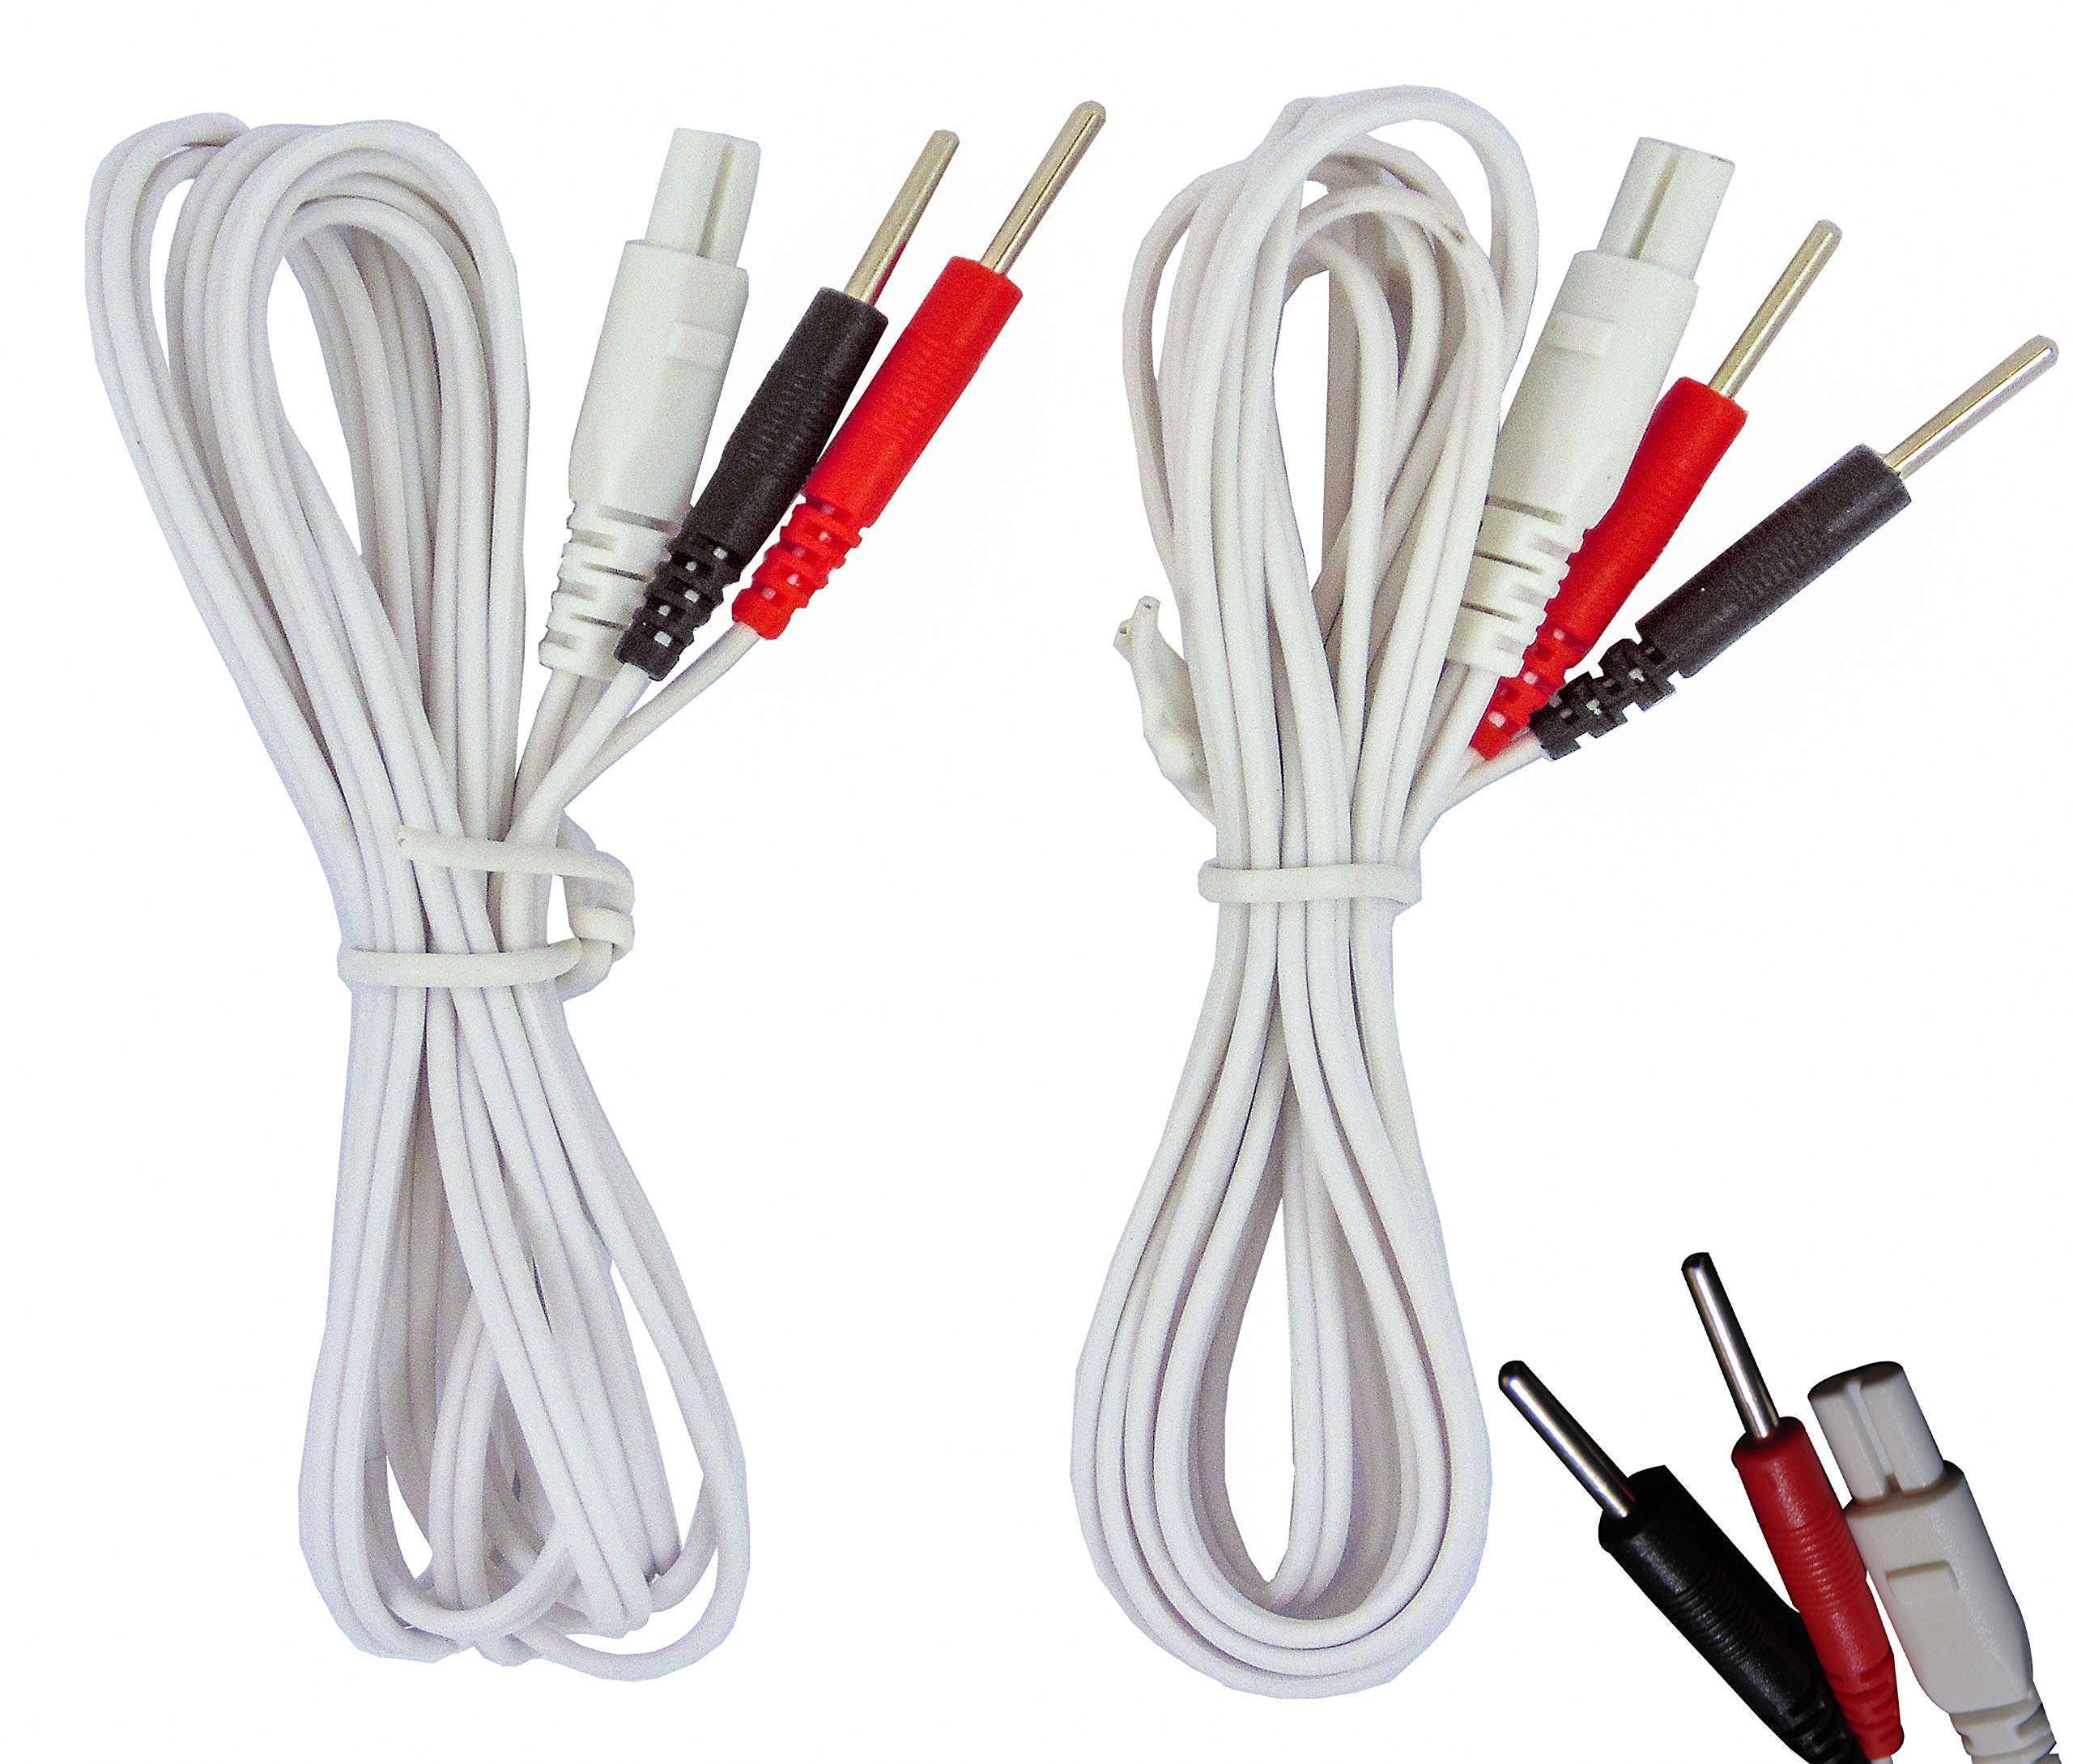 TENS LEADS WIRES TAIWAN (SET OF 4)